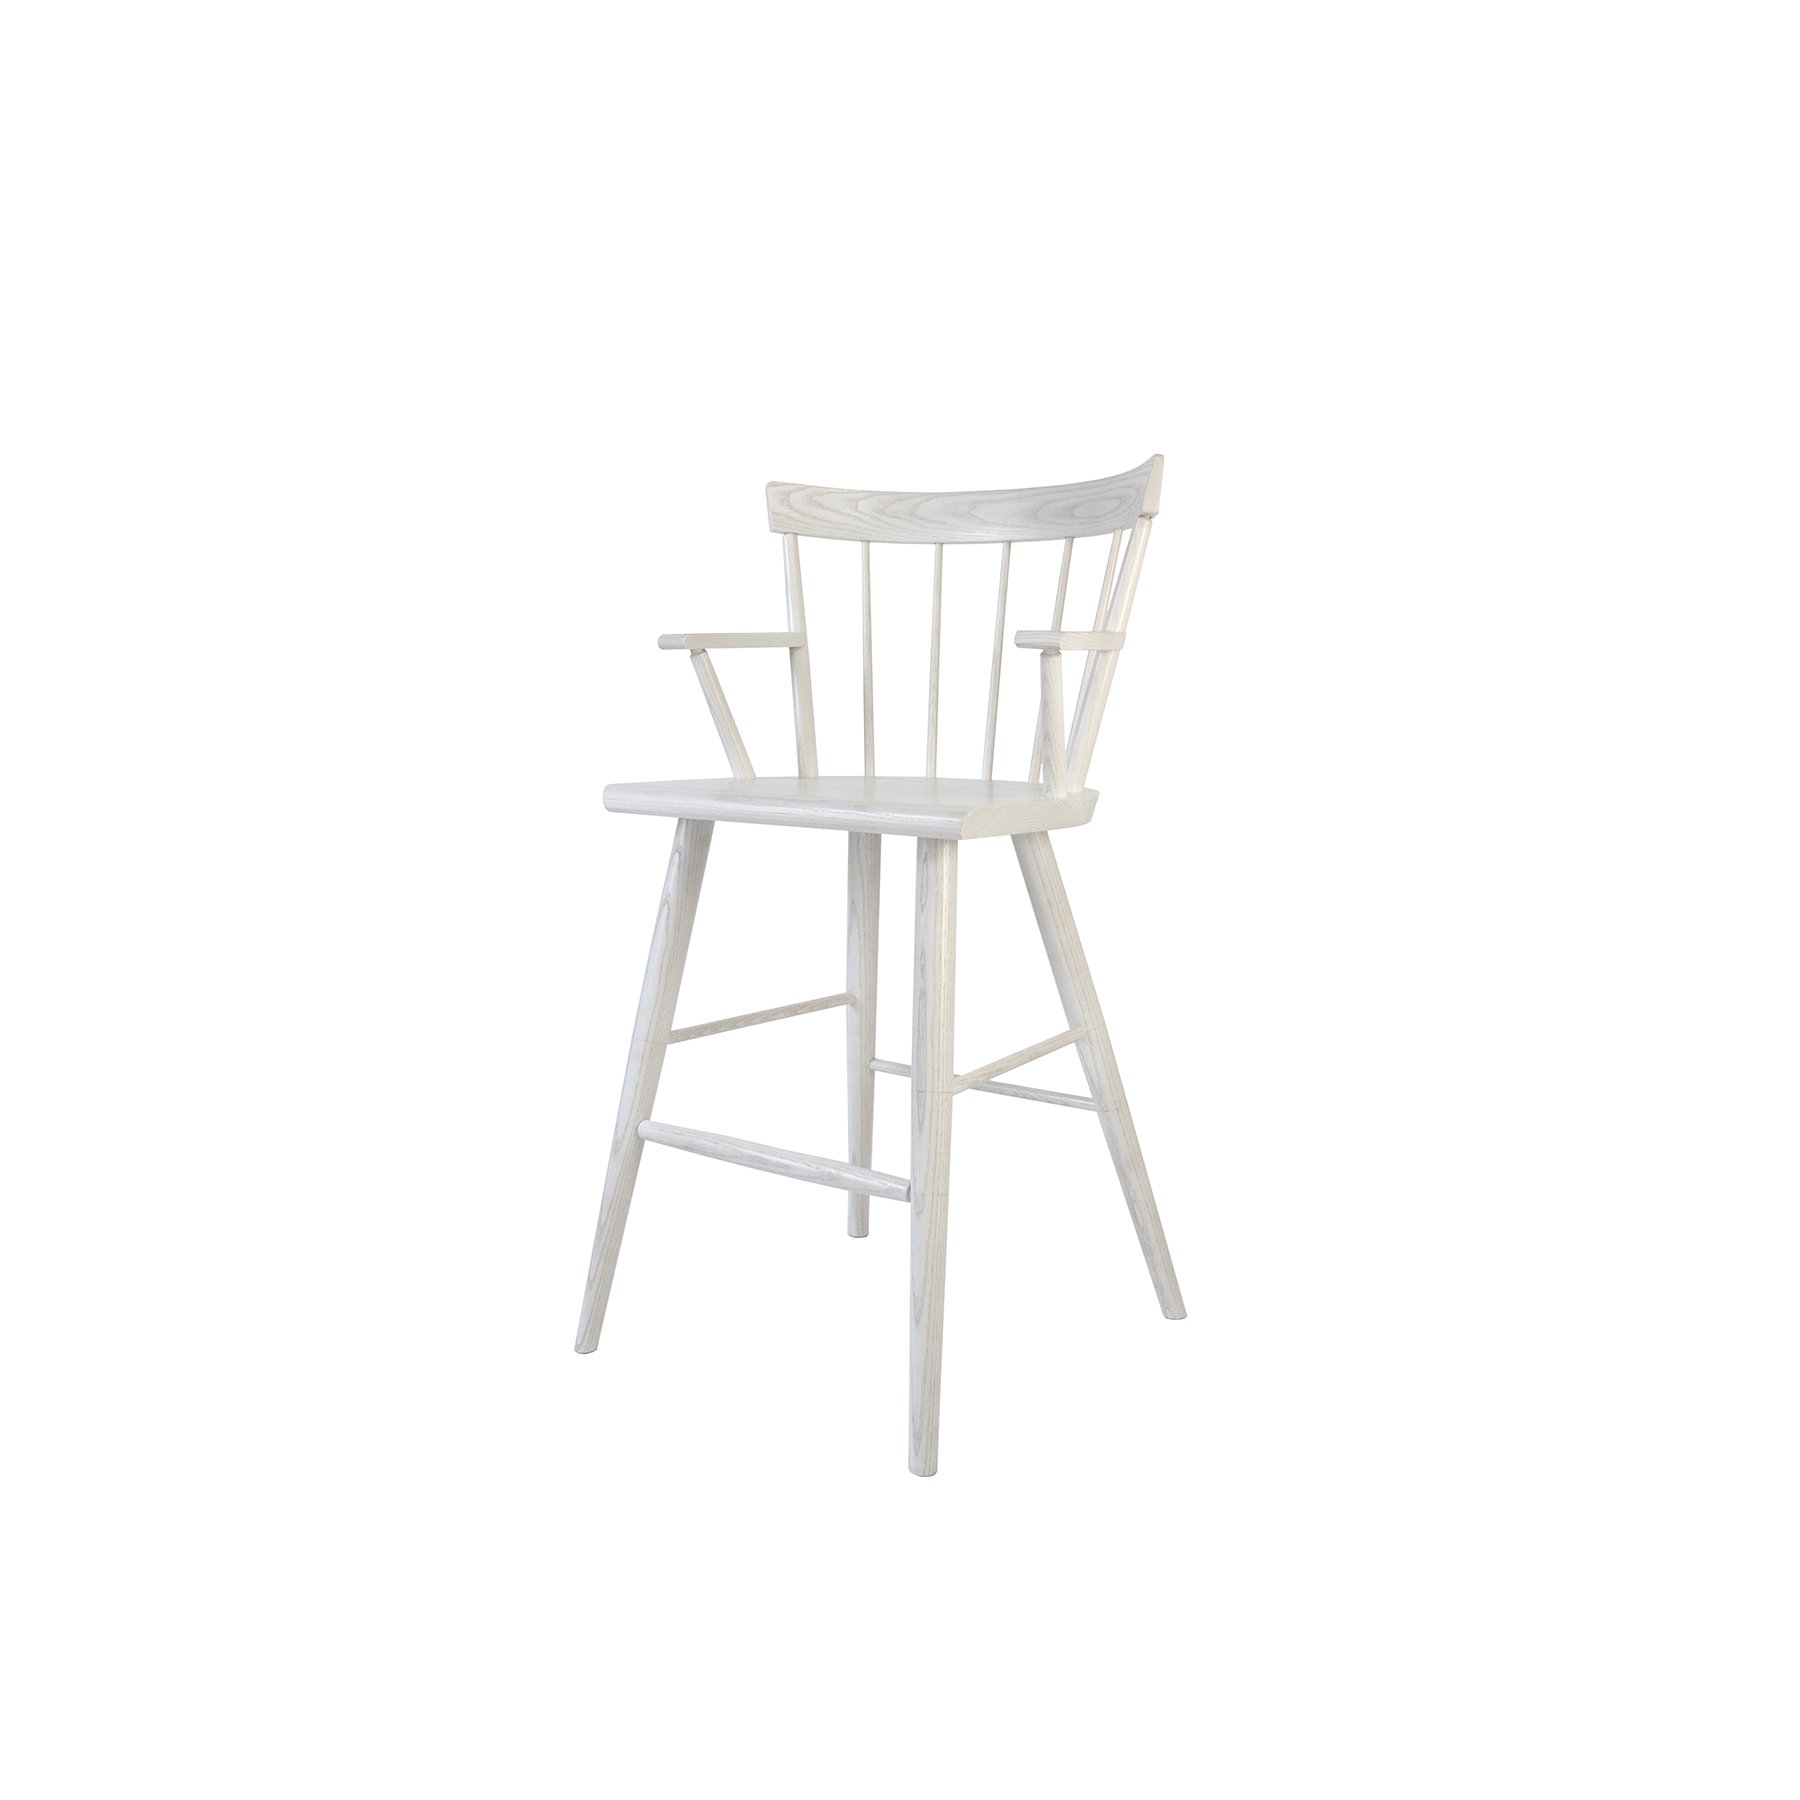 COLT COUNTER STOOL WITH ARMS 24” - $1,470